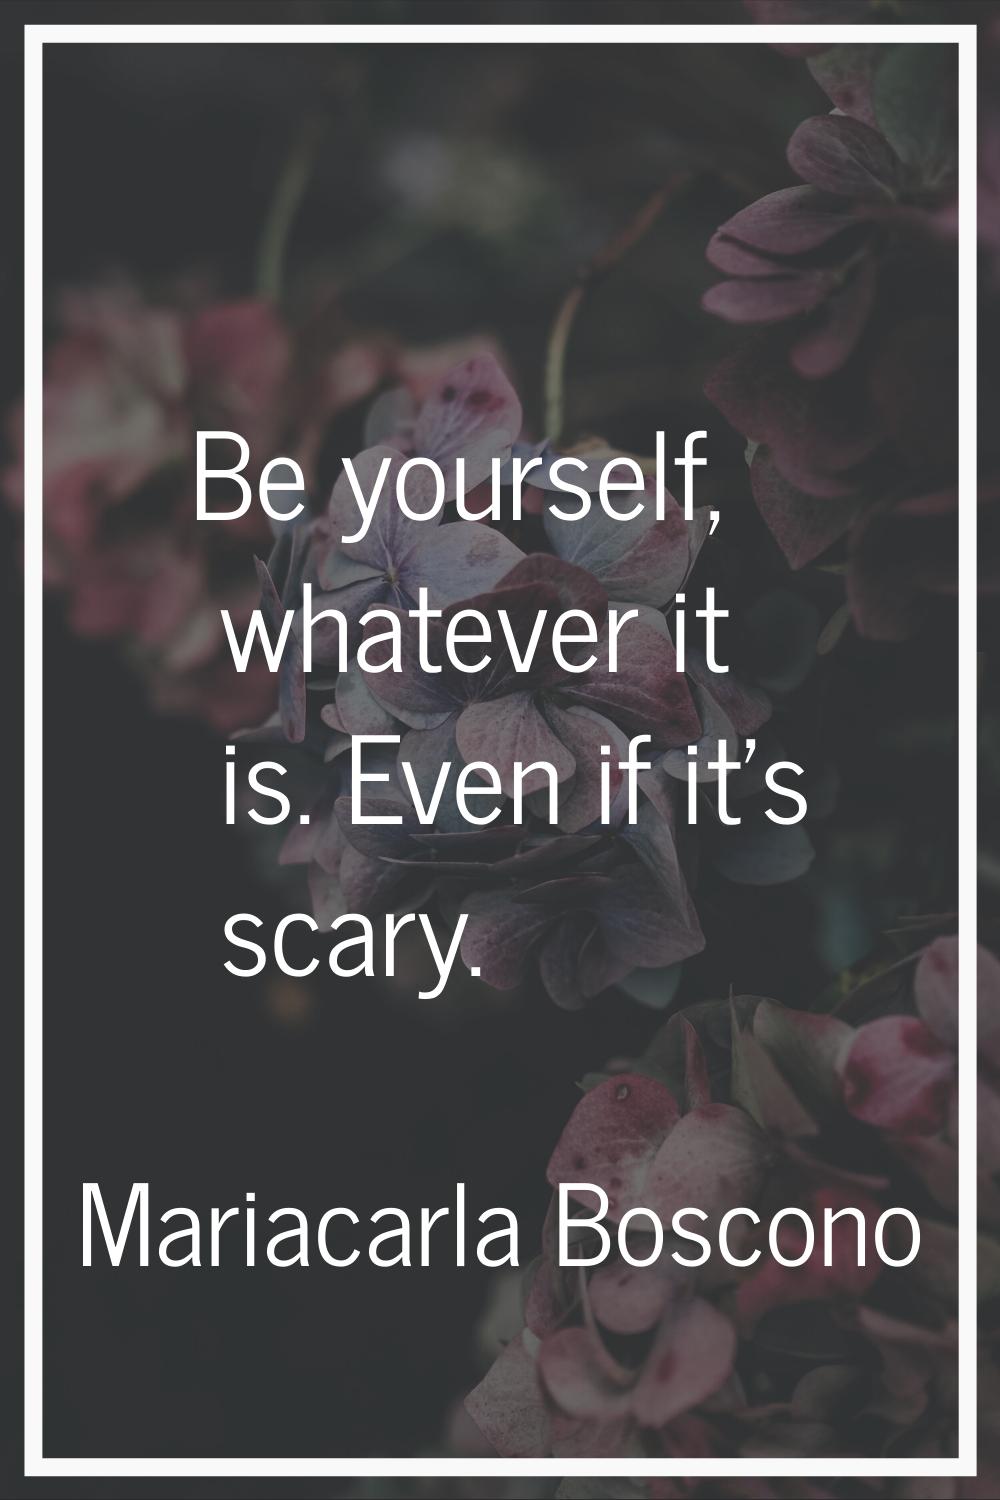 Be yourself, whatever it is. Even if it's scary.